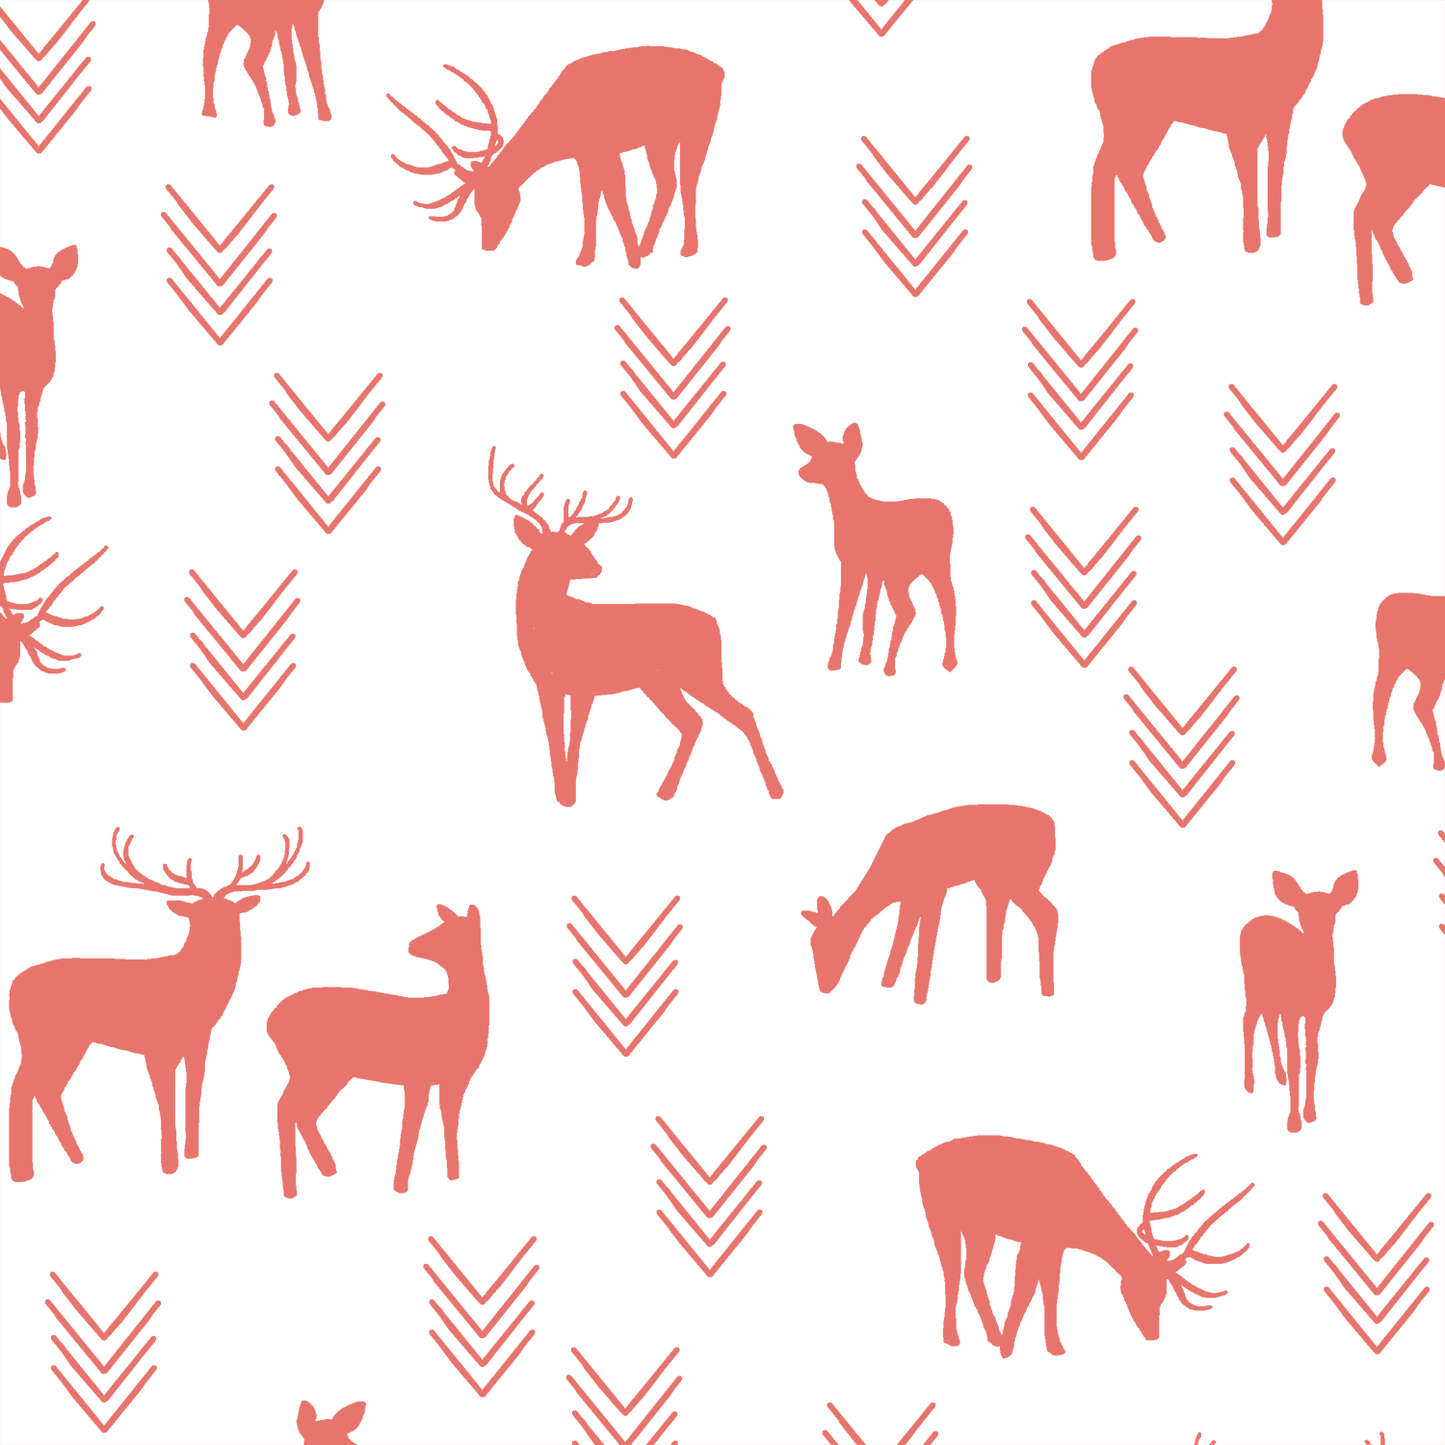 Deer Silhouette in Living Coral on White